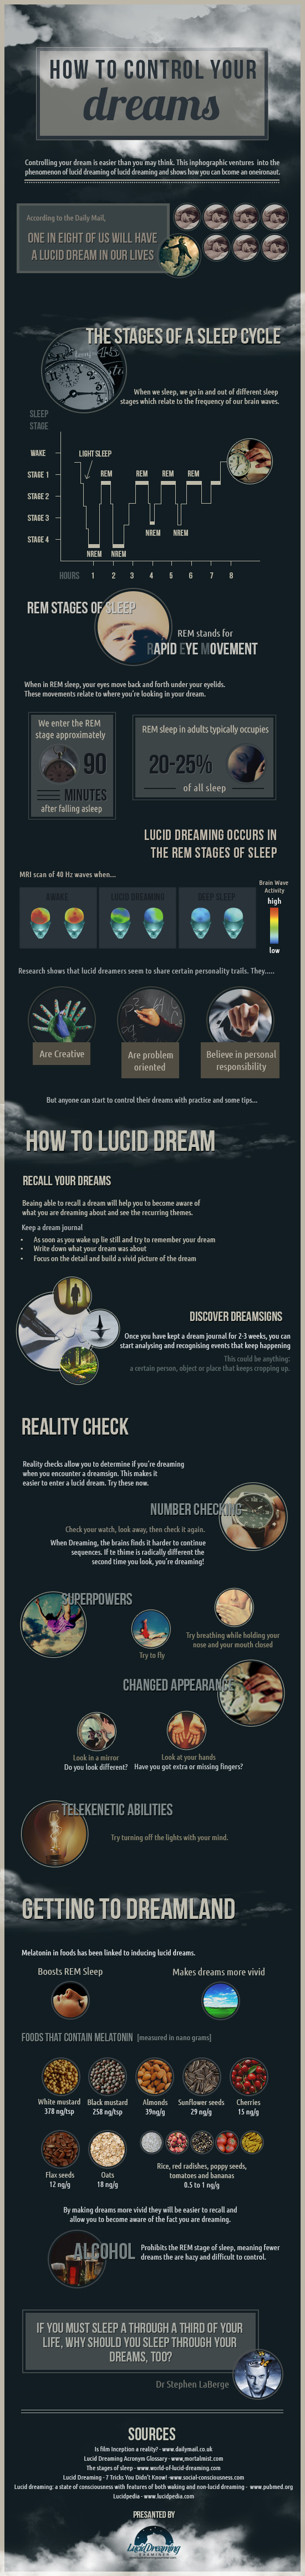 Infographic on Lucid Dreaming